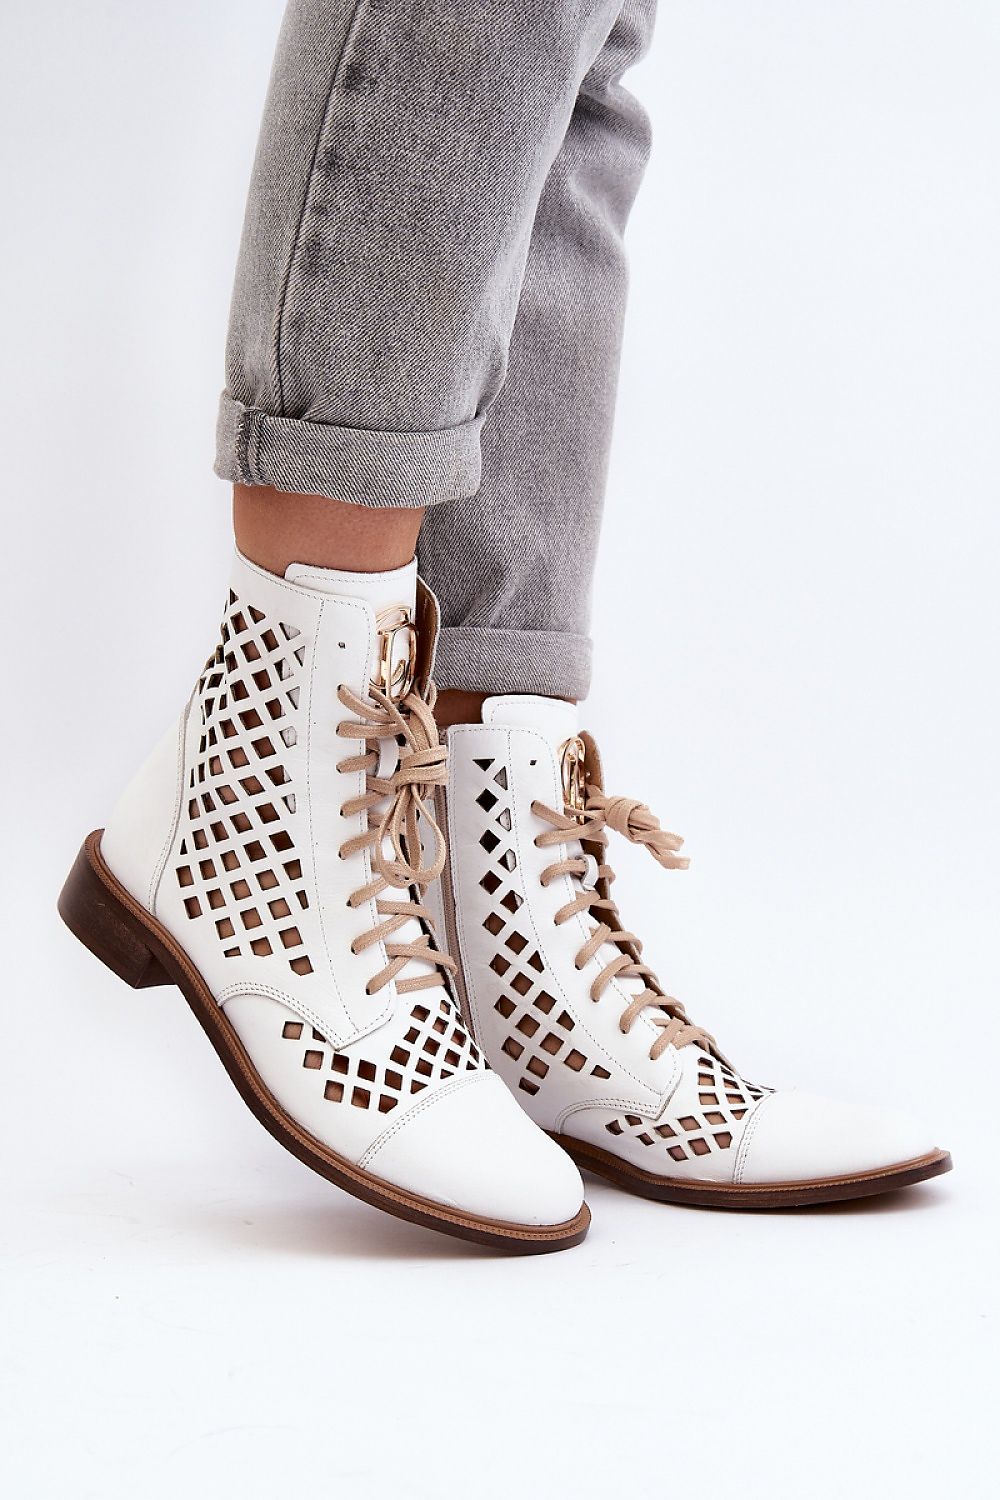 TEEK - Mesh Natural Leather AnkleBoots SHOES TEEK MH white 6.5 